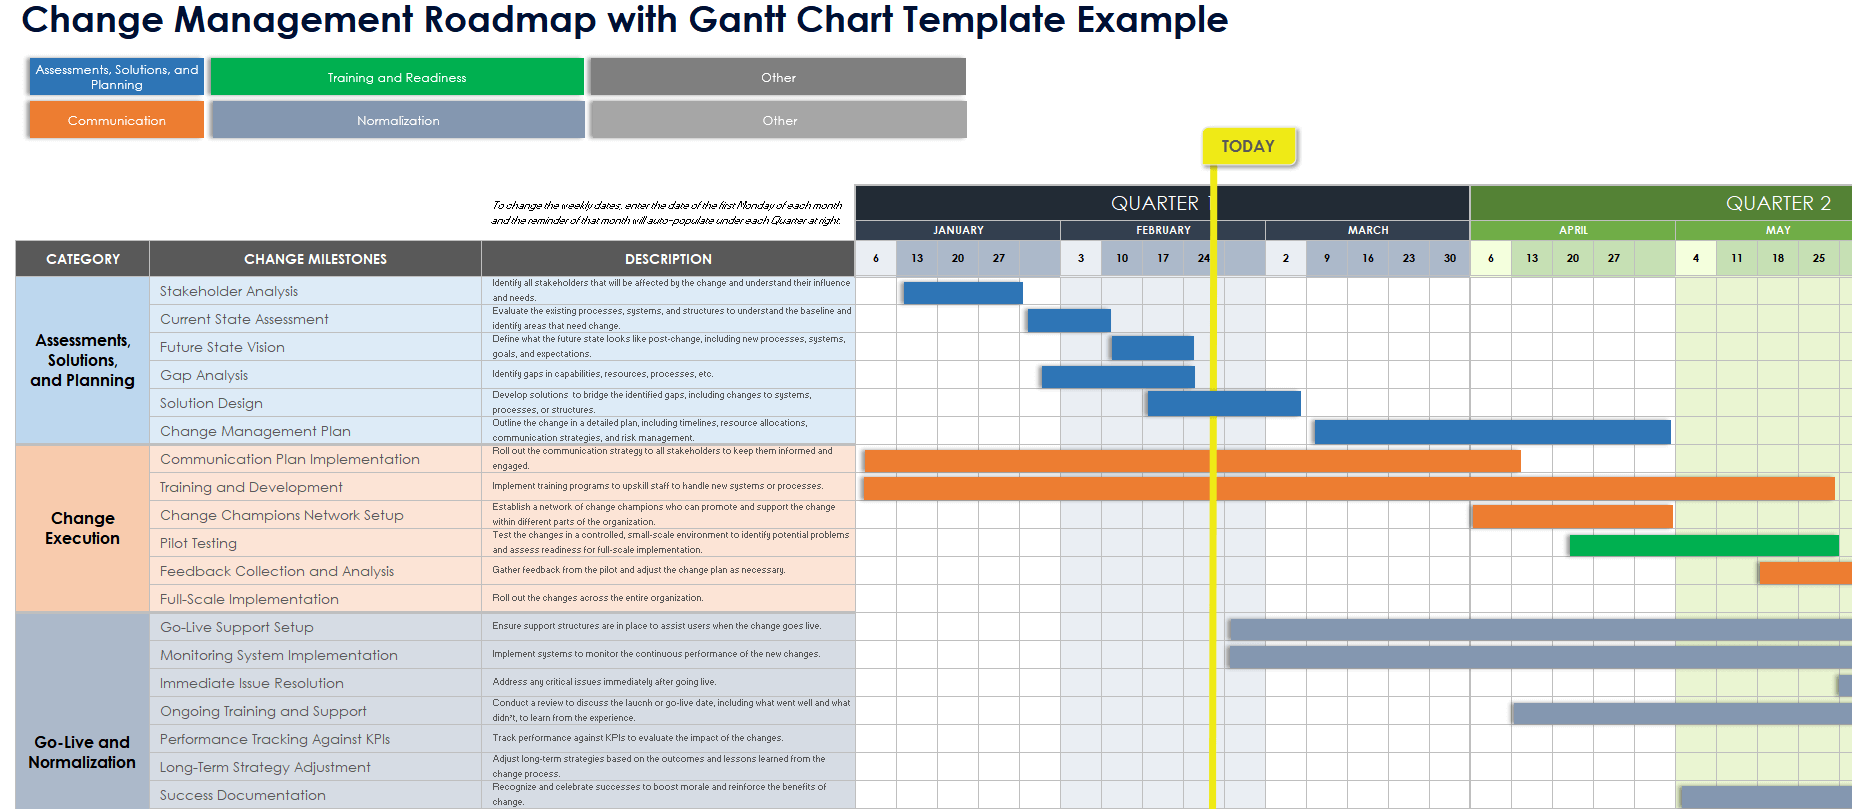 Change Management Roadmap with Gantt Chart Template Example